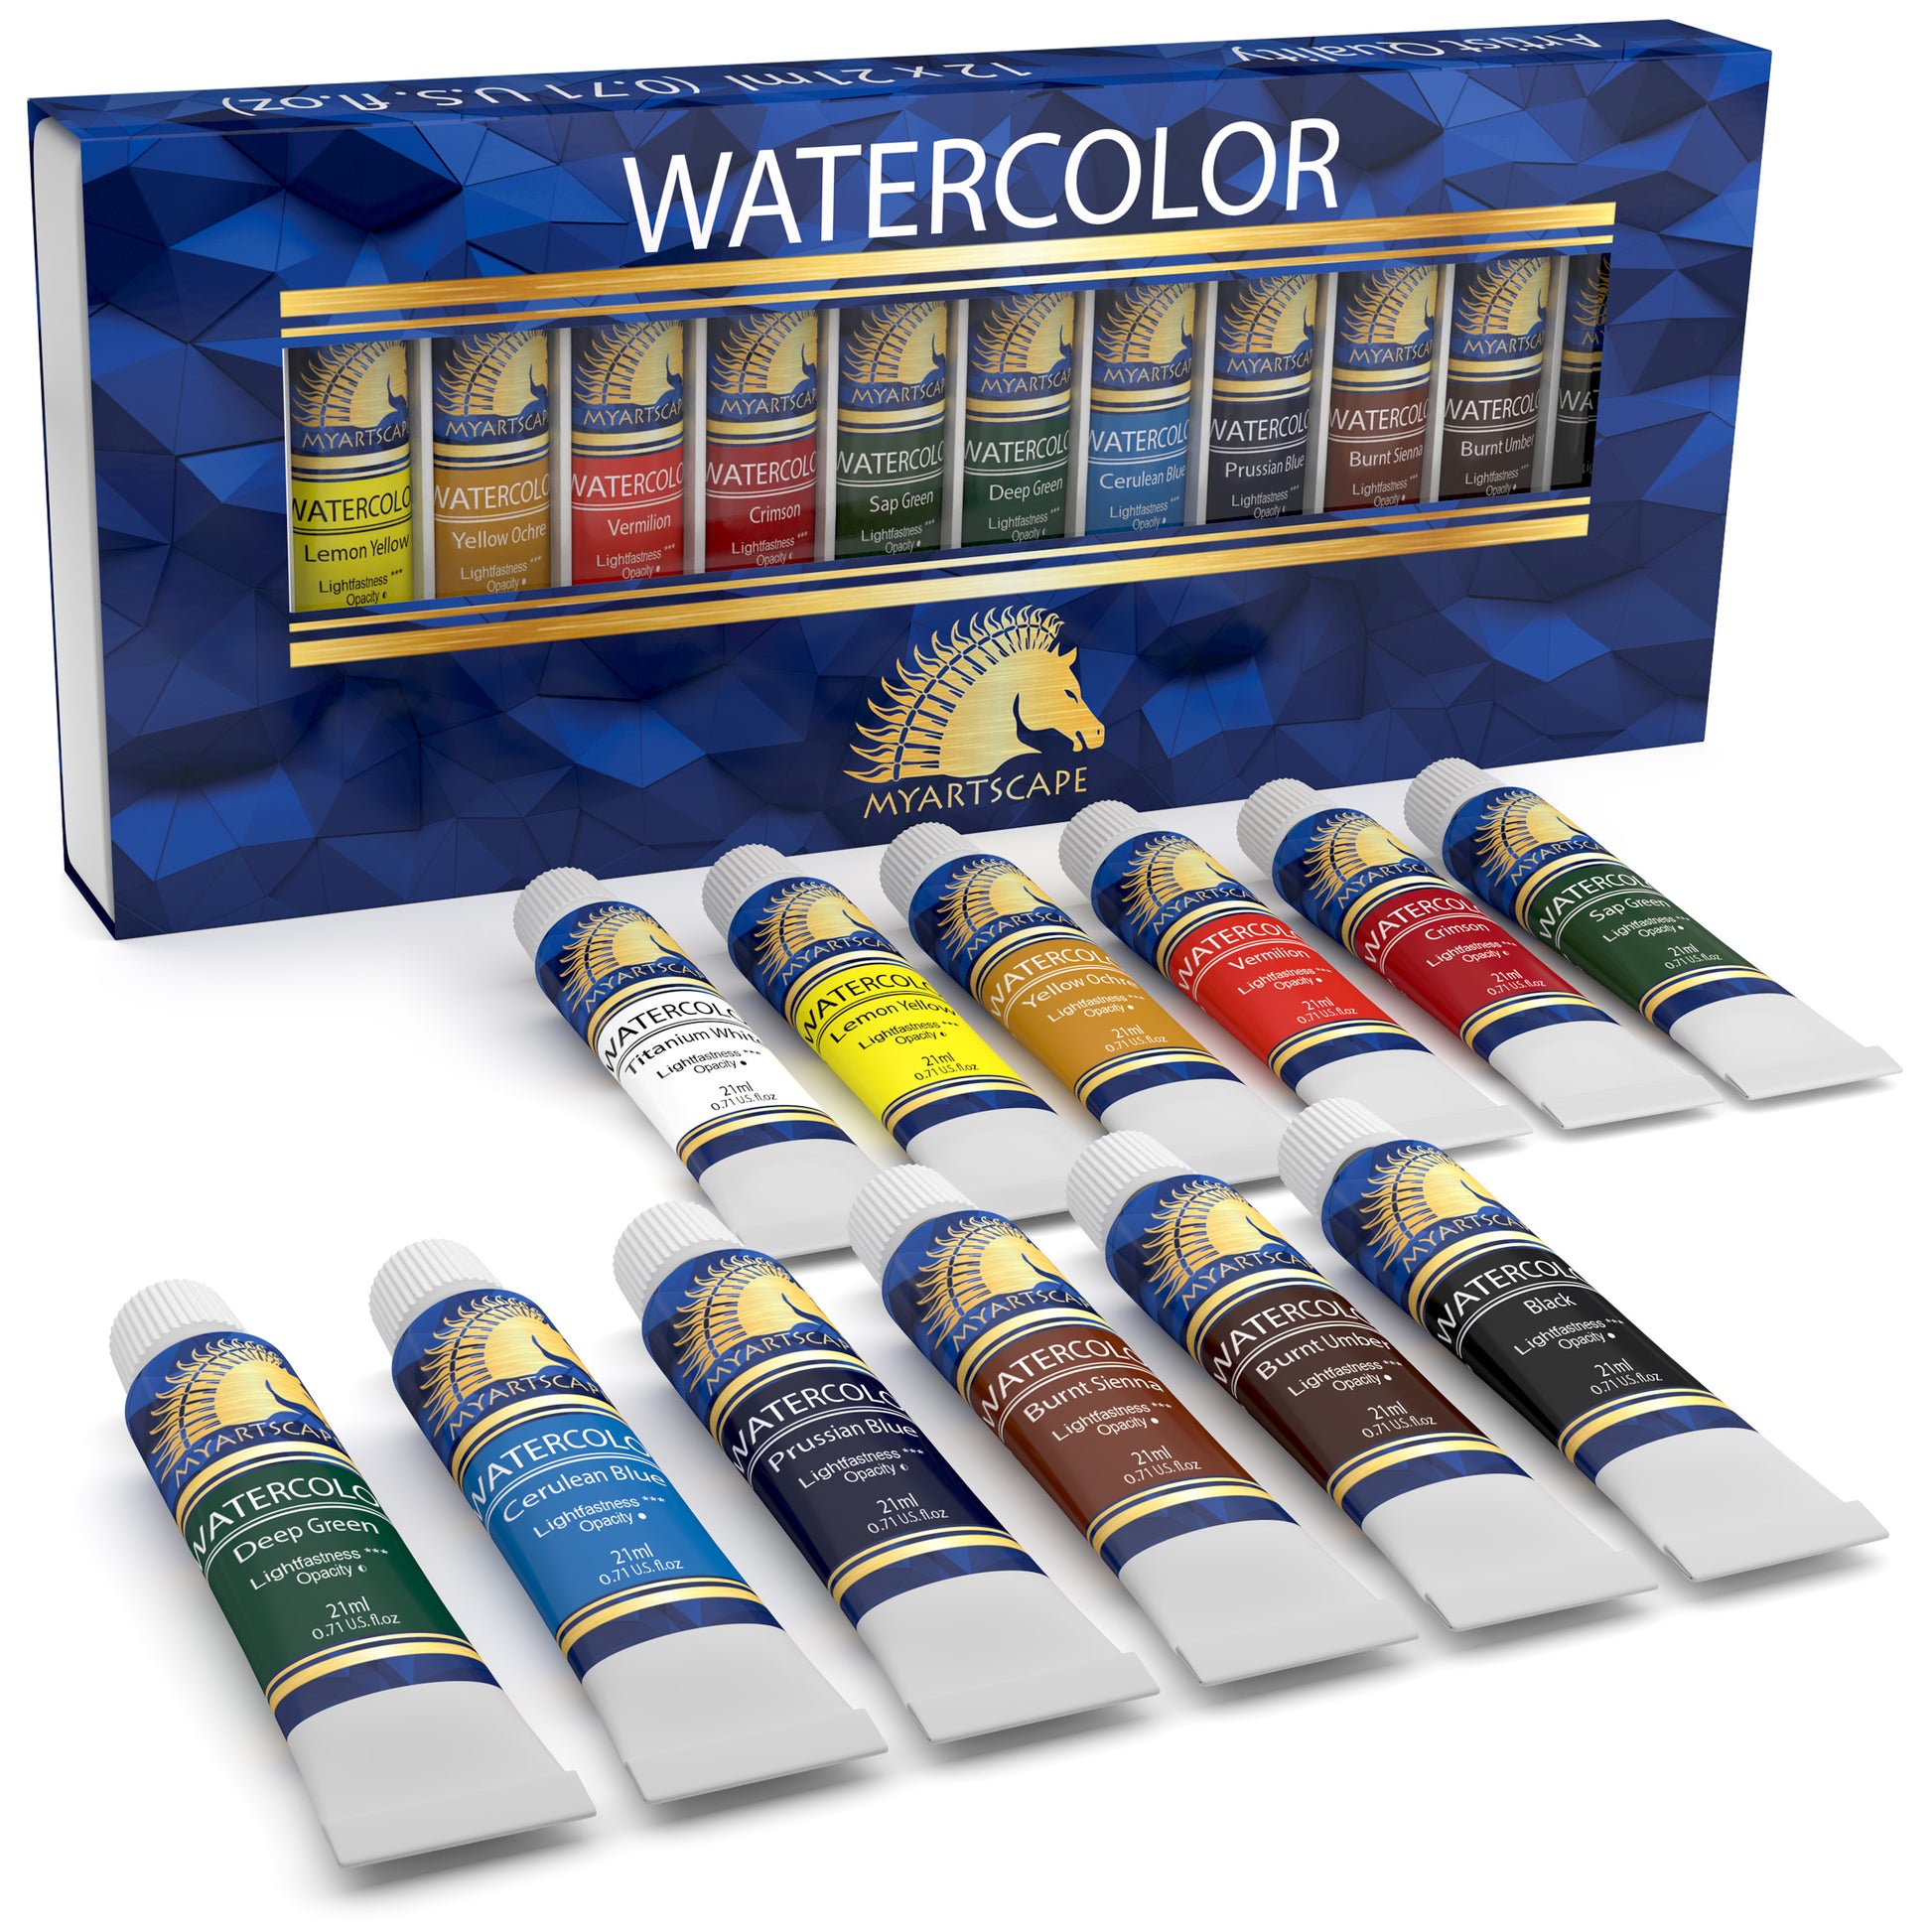  MyArtscape Gouache Paint Set - 12 x 12ml Tubes - Artist Quality  - Lightfast - Premium Vibrant Colors - Fade-proof - Rewettable - High  Pigment Load - Professional Painting Supplies : Arts, Crafts & Sewing